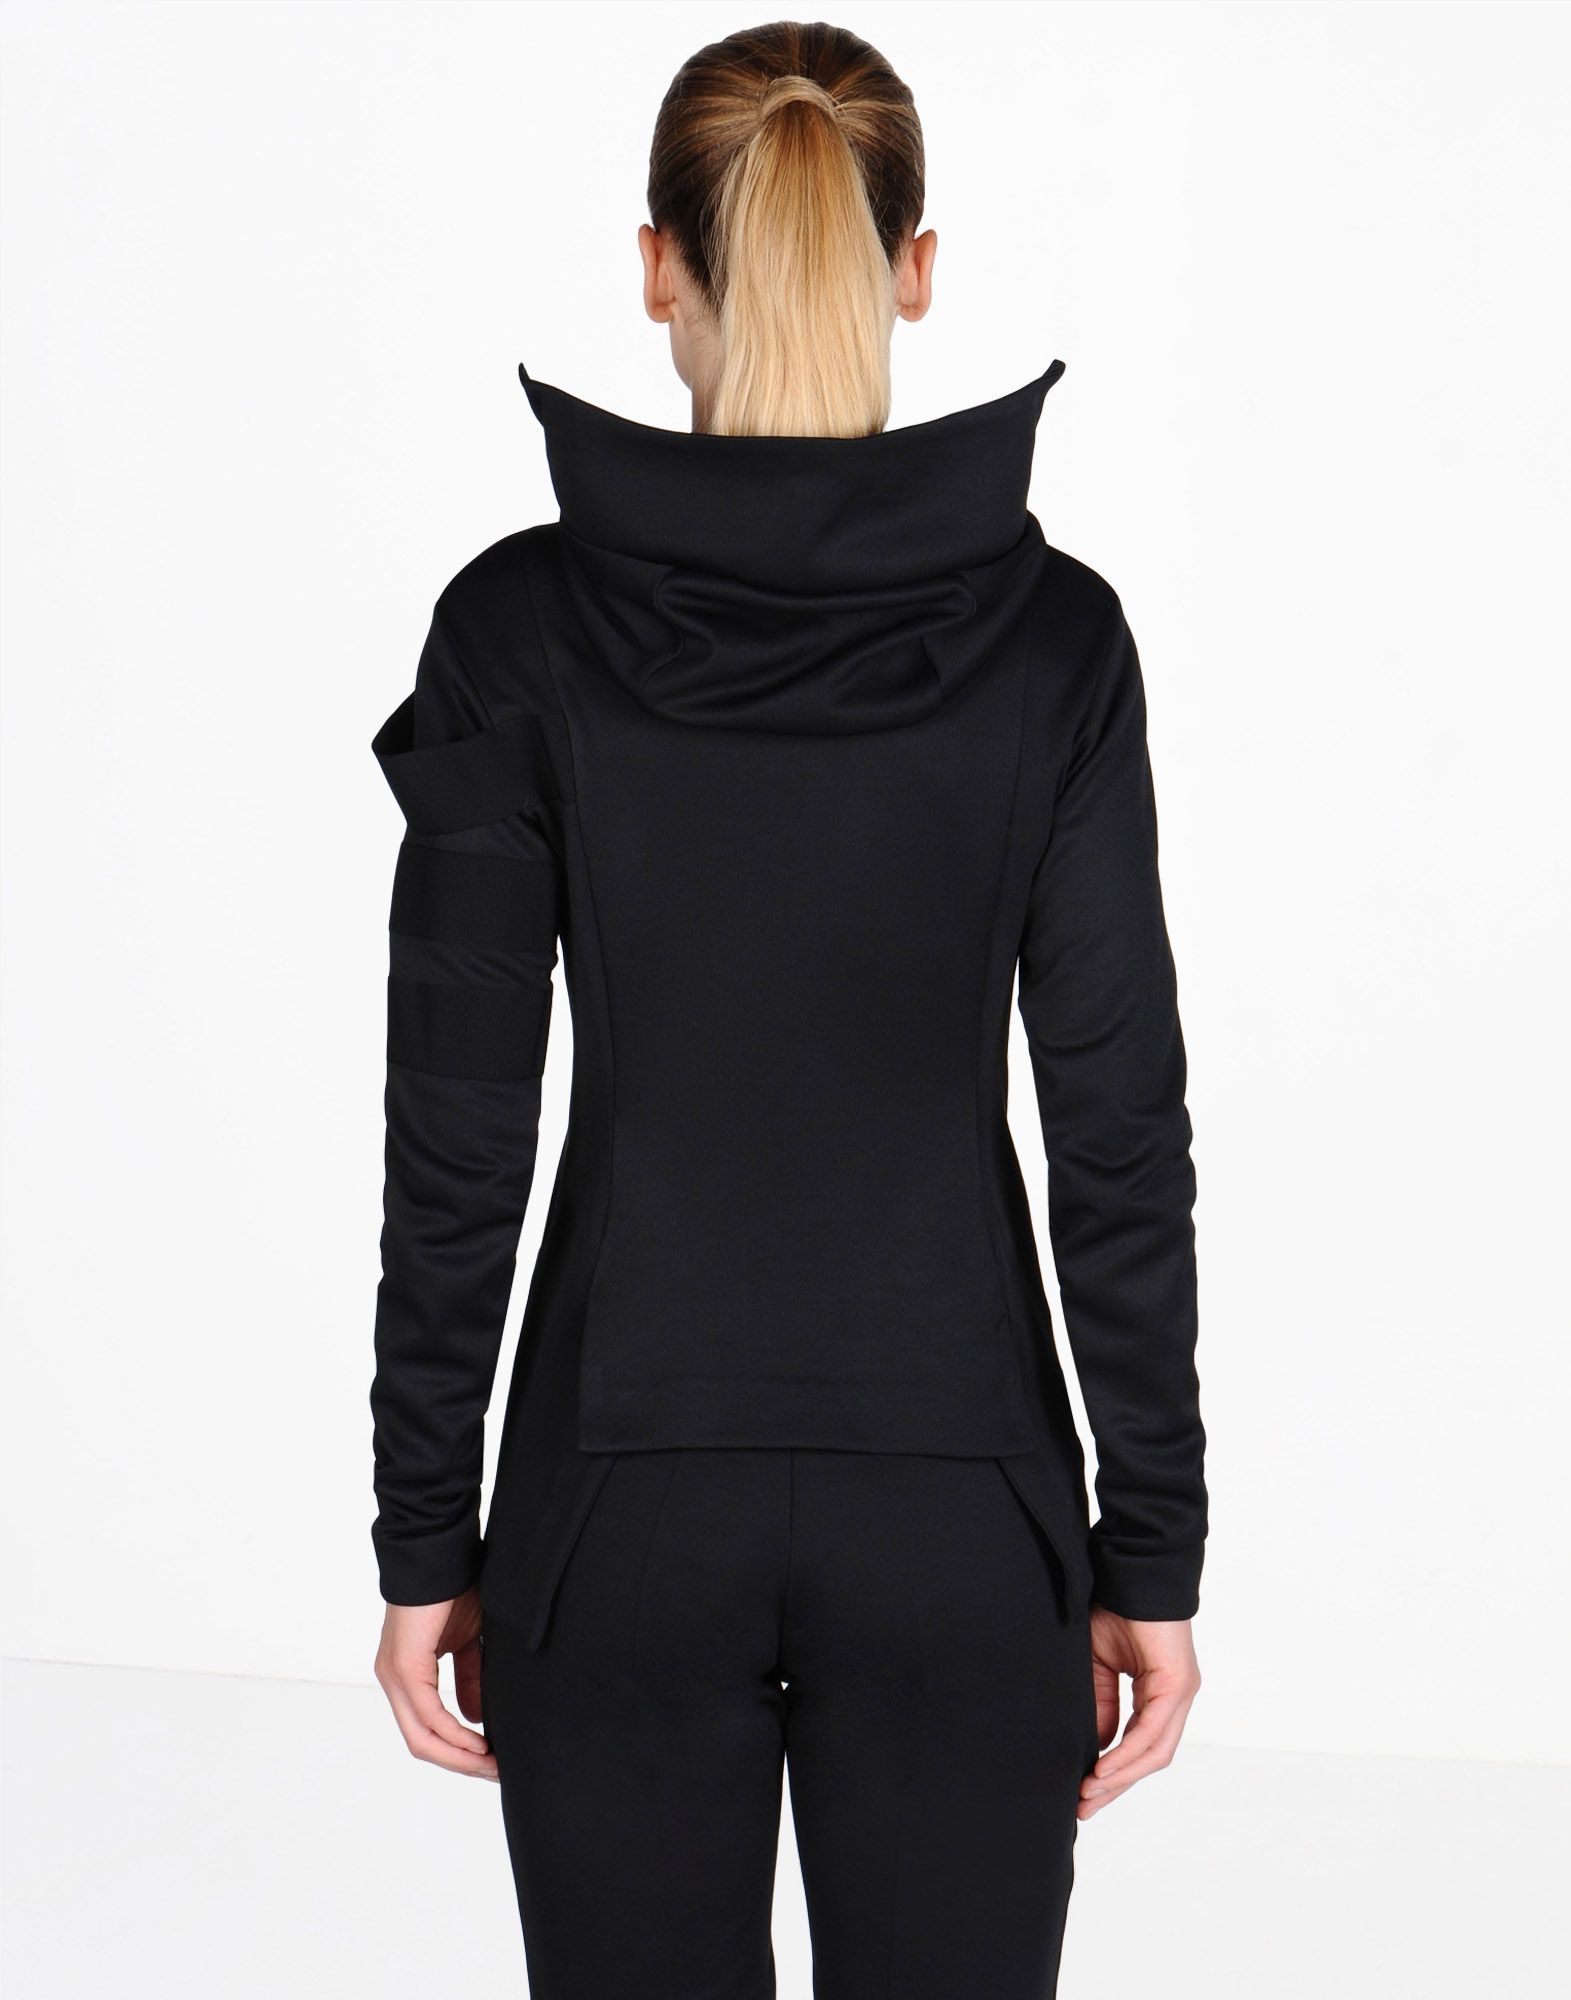 Y 3 3 STRIPE TRACK HOODIE for Women | Adidas Y-3 Official Store